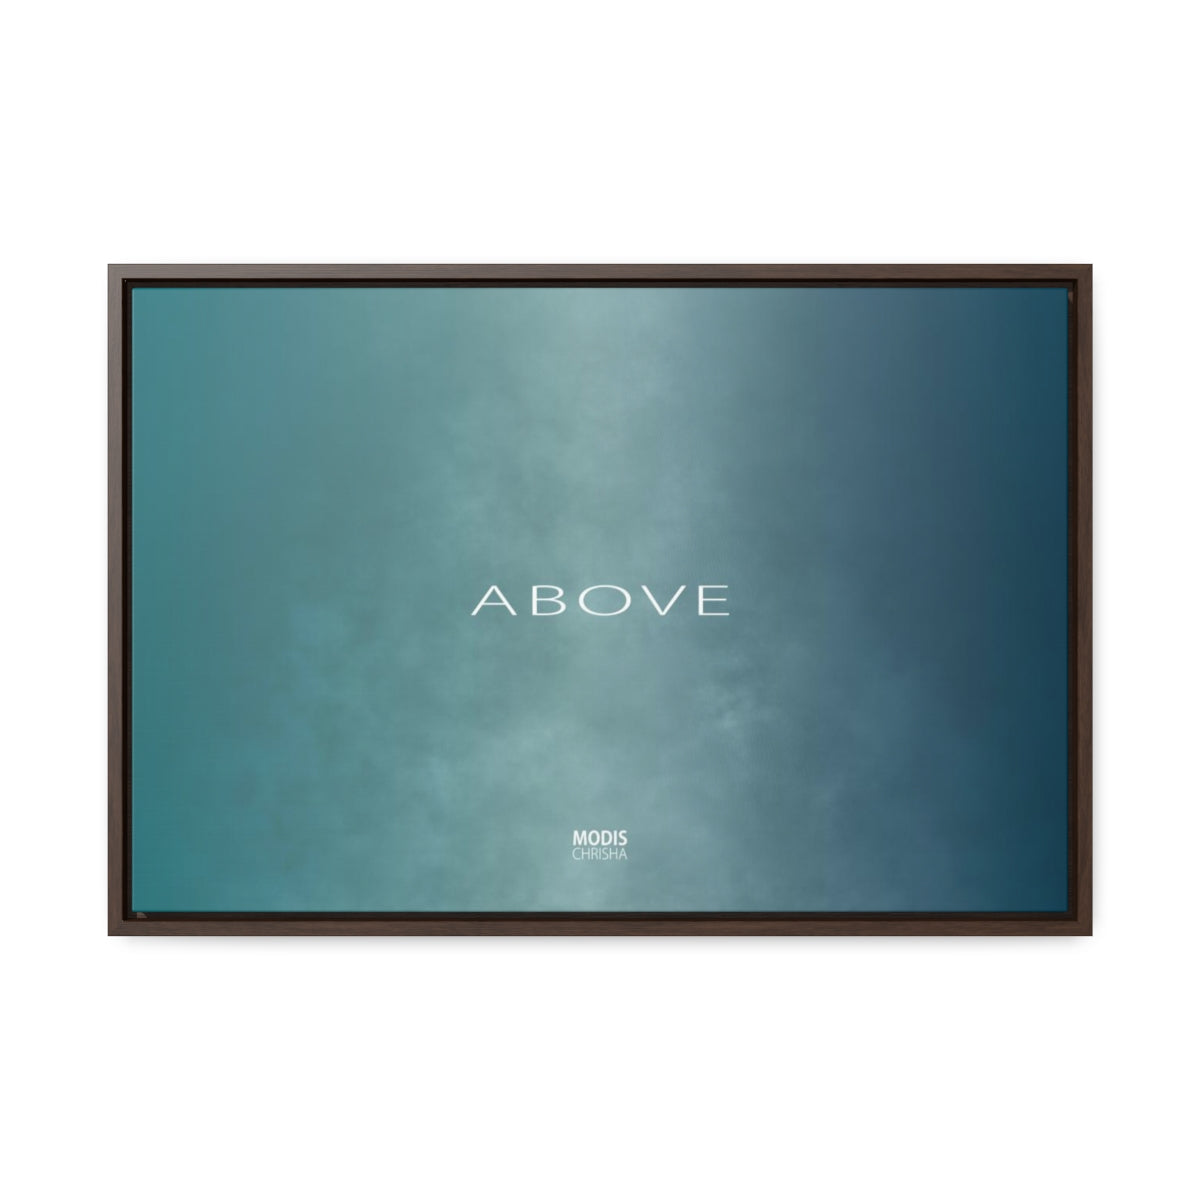 Canvas Gallery Wrap Framed Horizontal 24“ x 16“ - Design Above